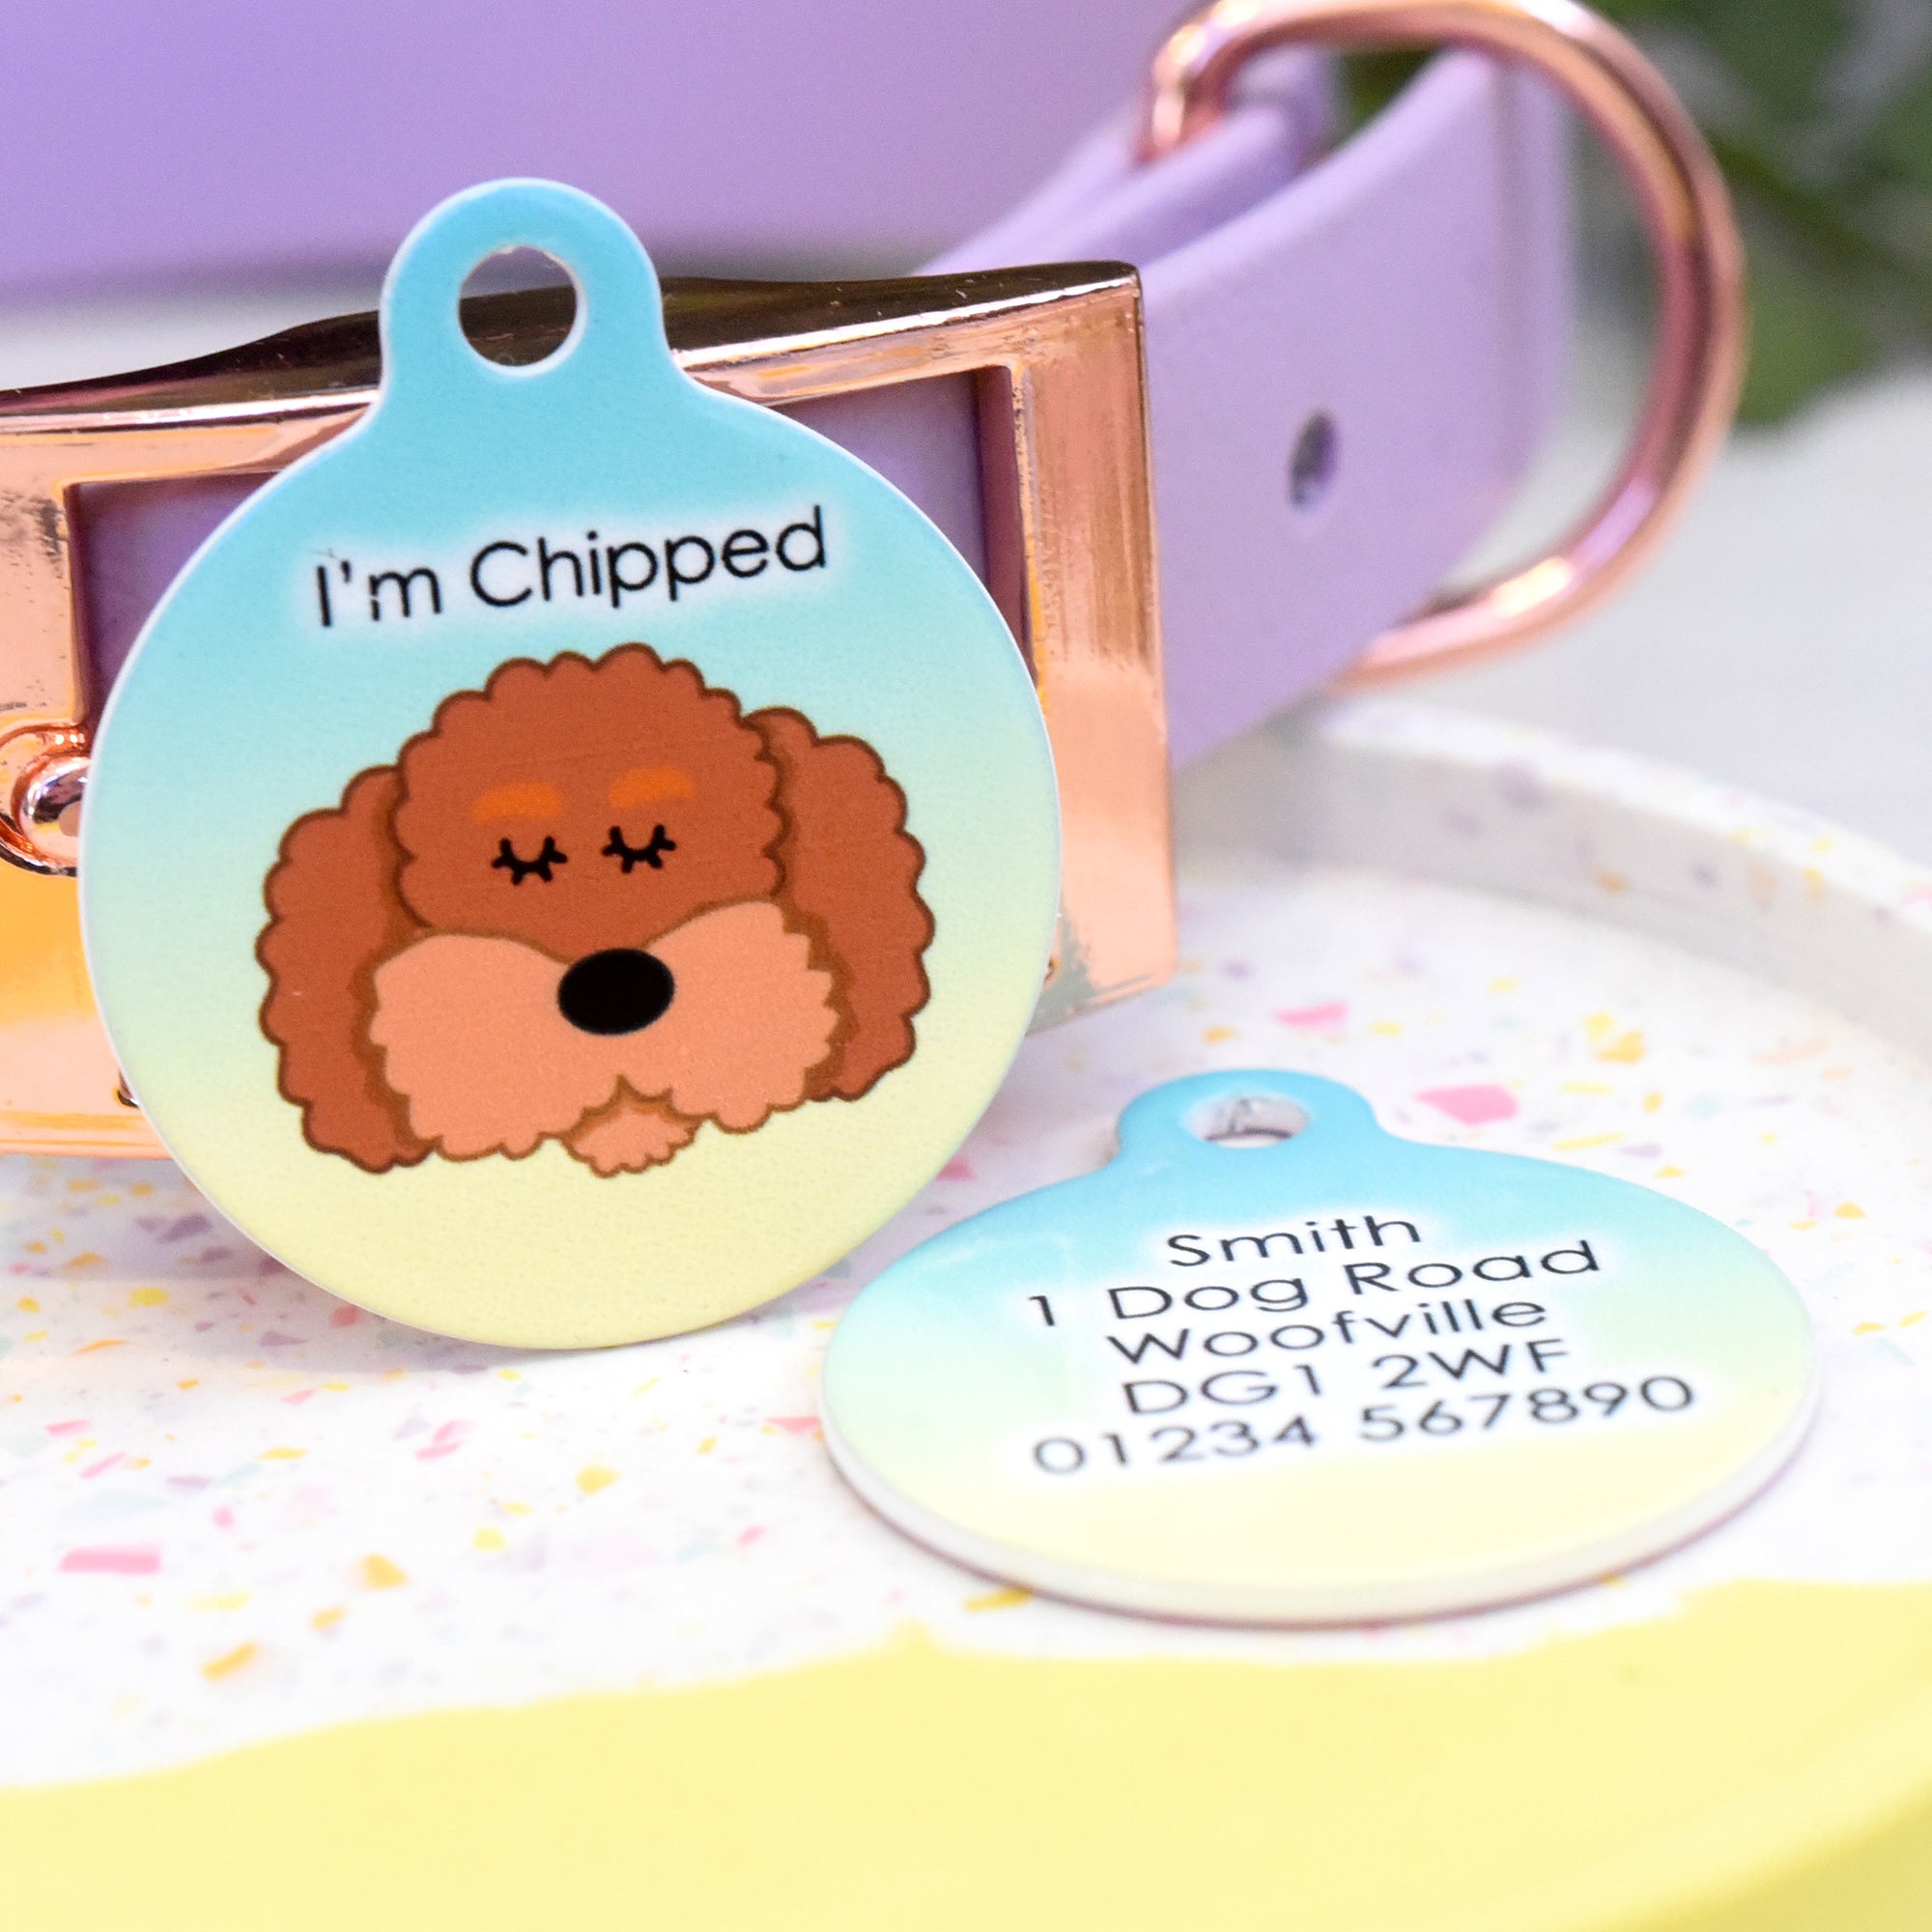 Cockapoo Personalised Dog Tag - Ombre